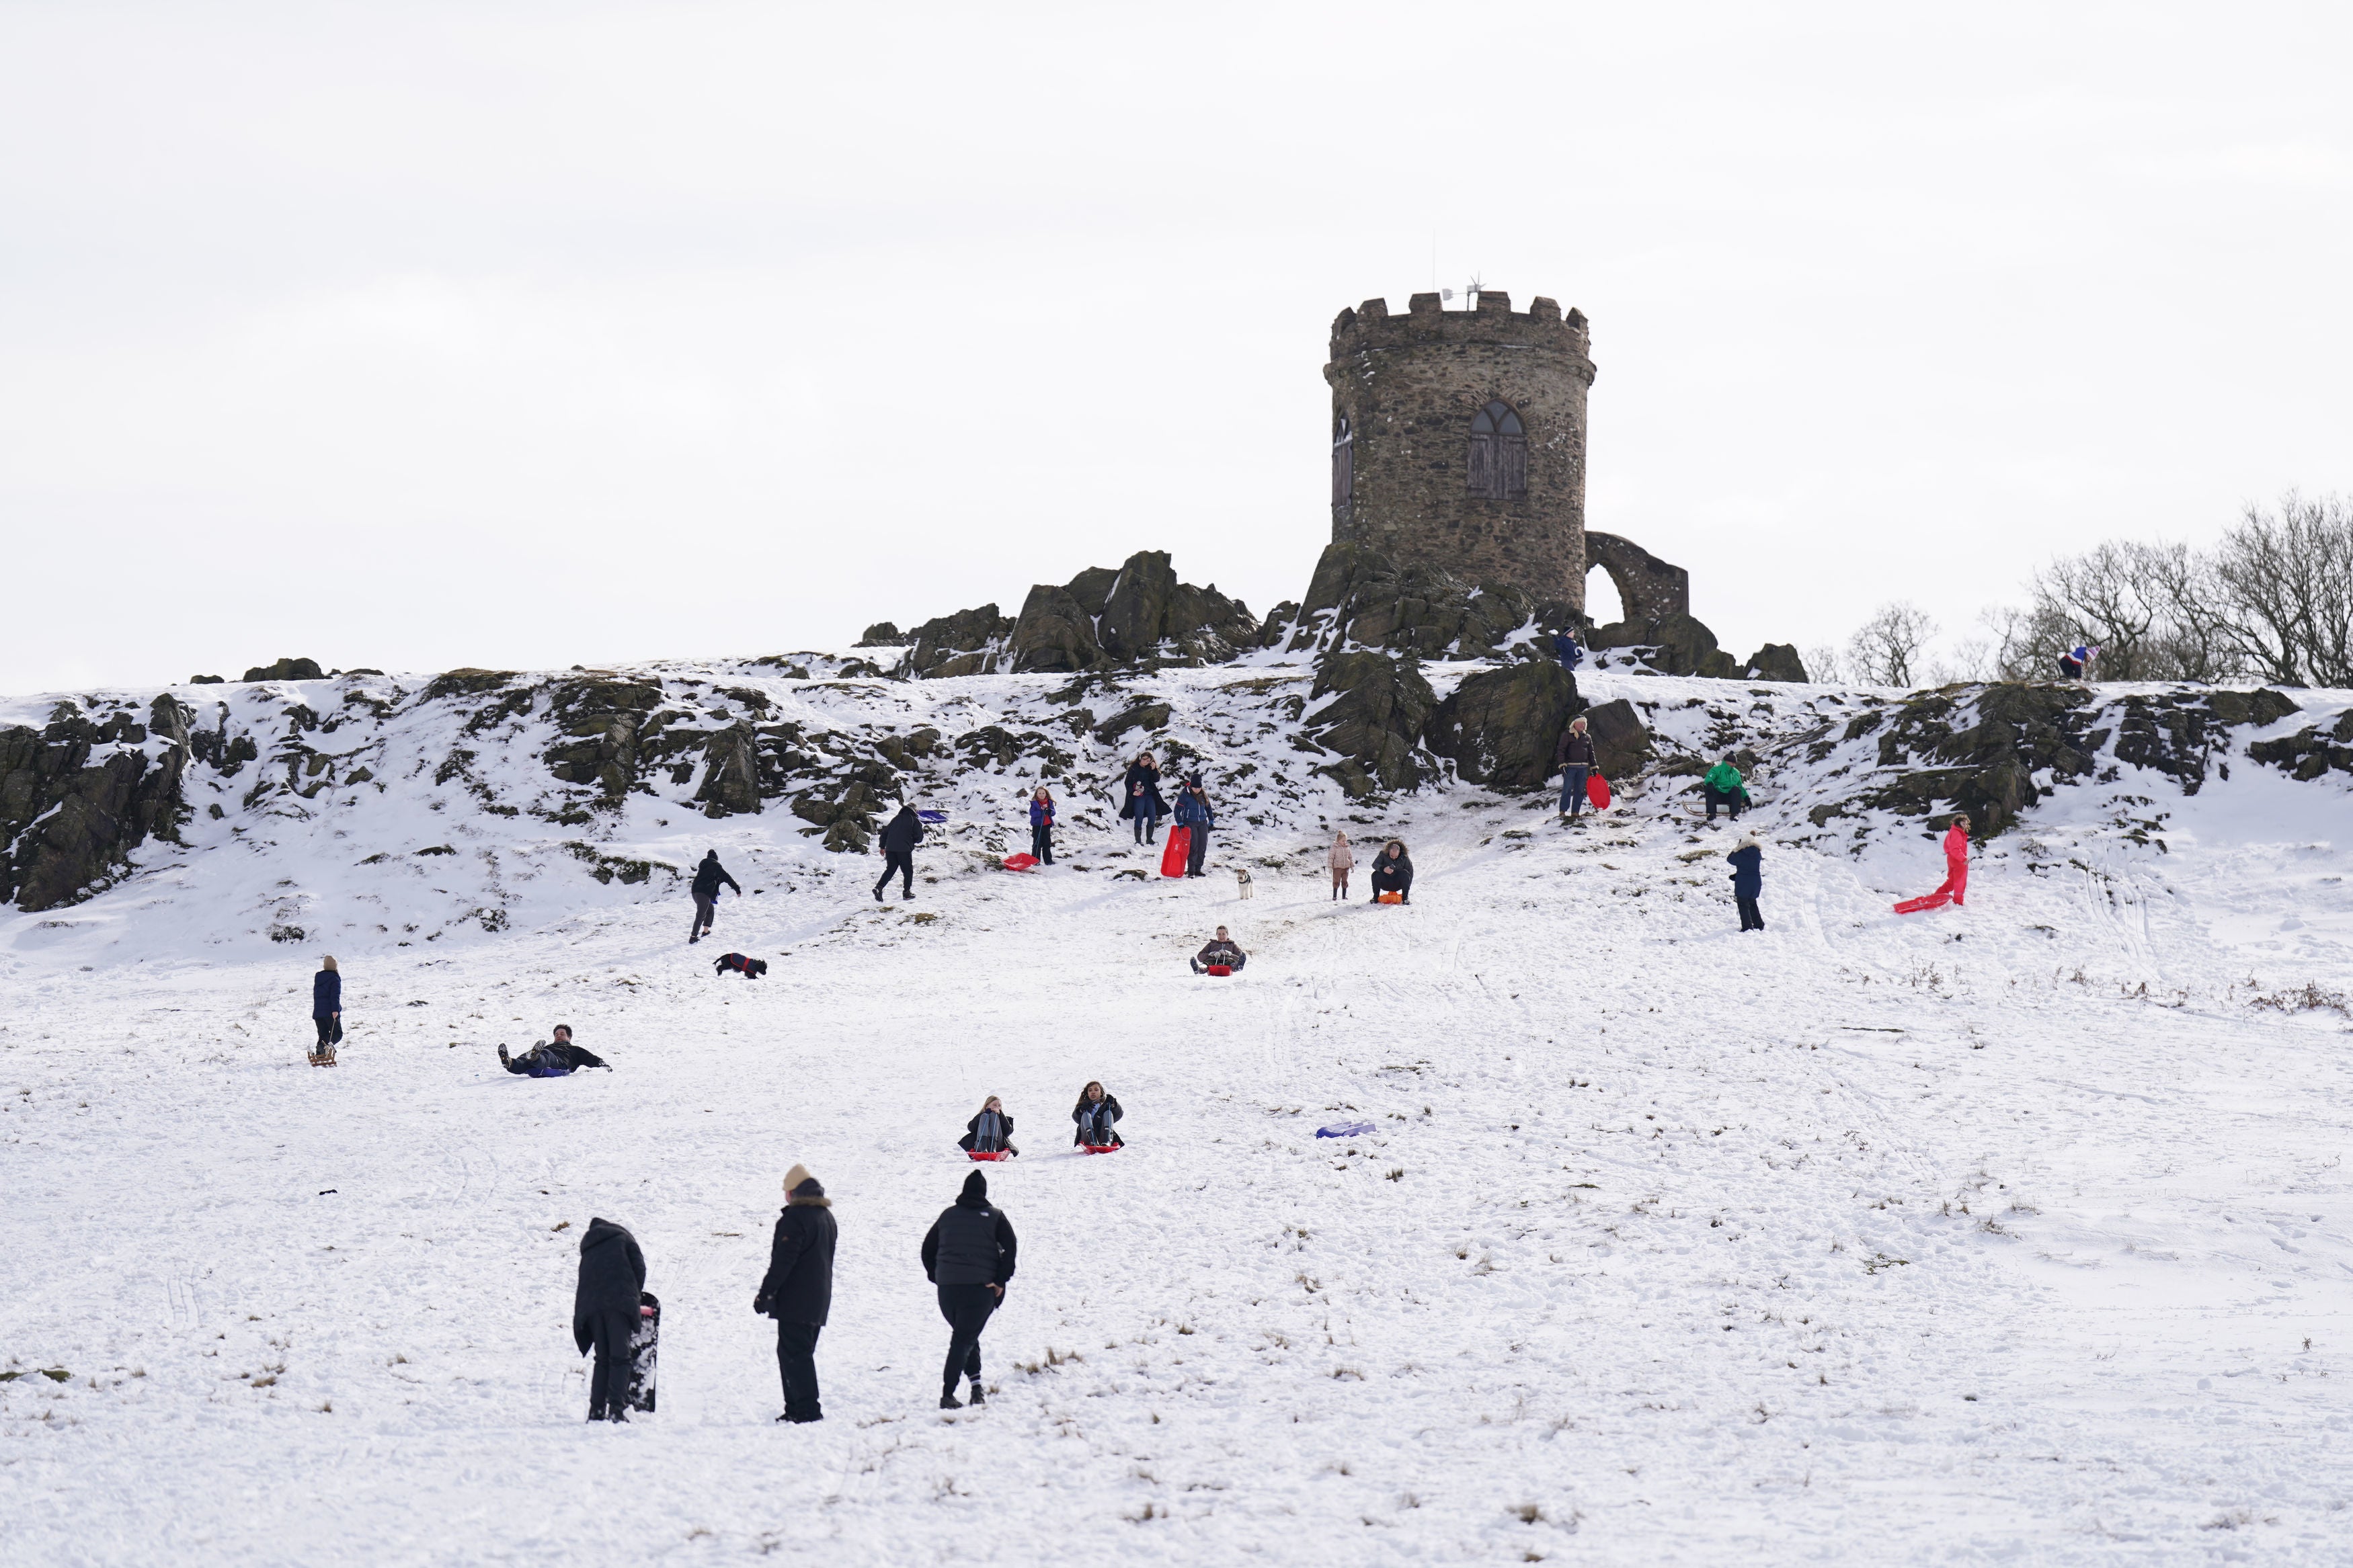 People sledging in the snow at Bradgate park in Leicestershire